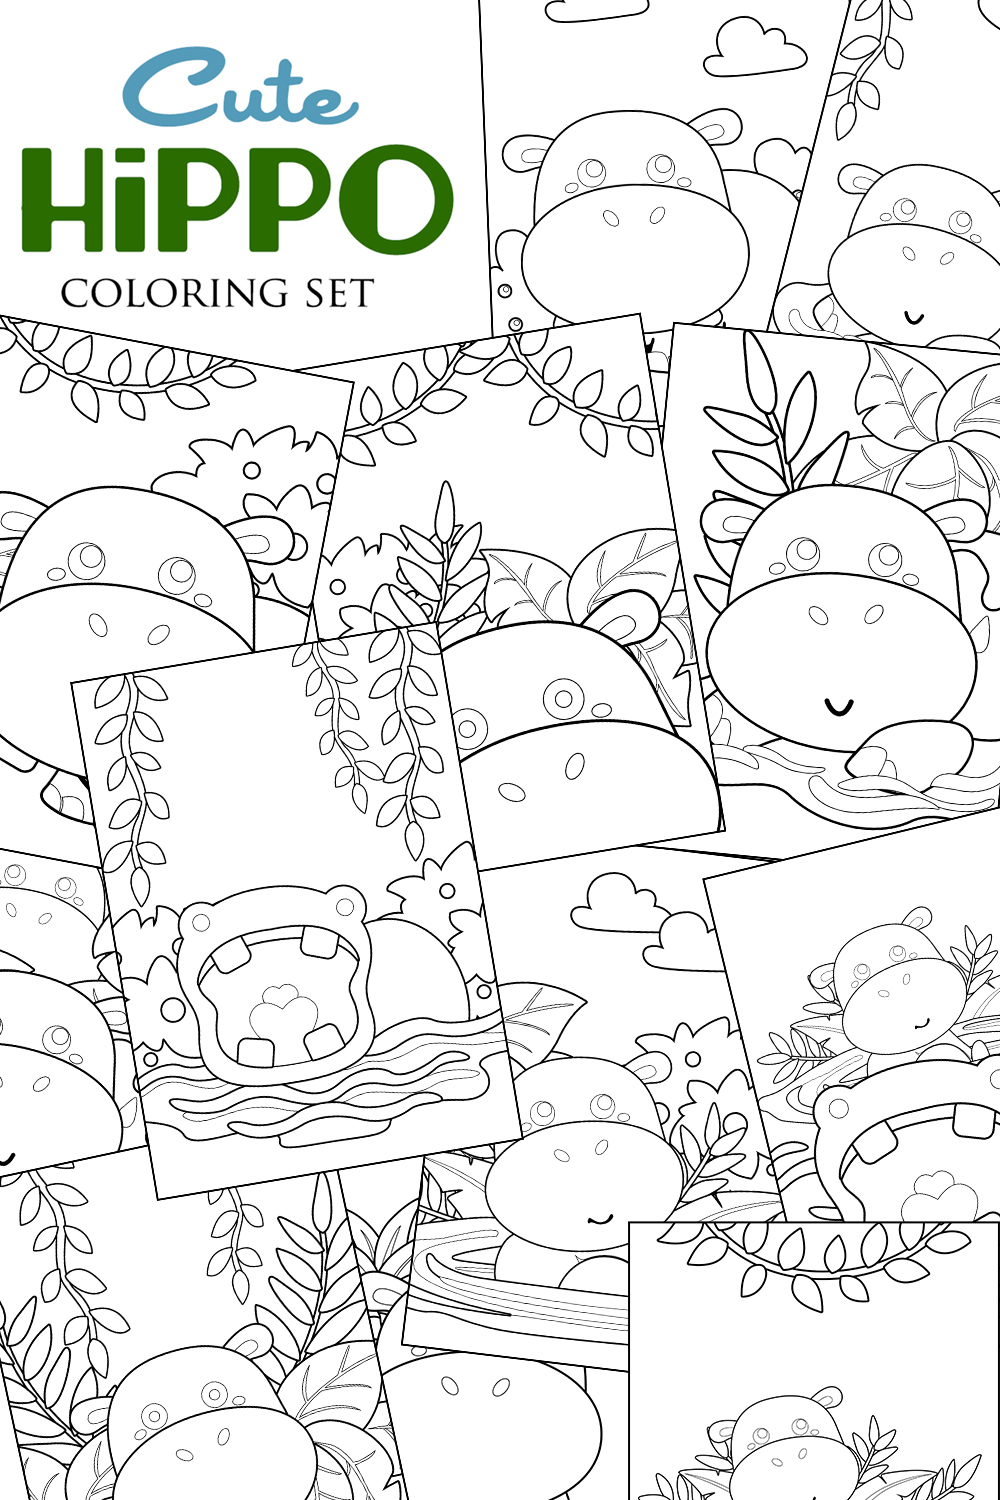 Cute Hippotamus Animal River Coloring Pages for Kids and Adult pinterest preview image.